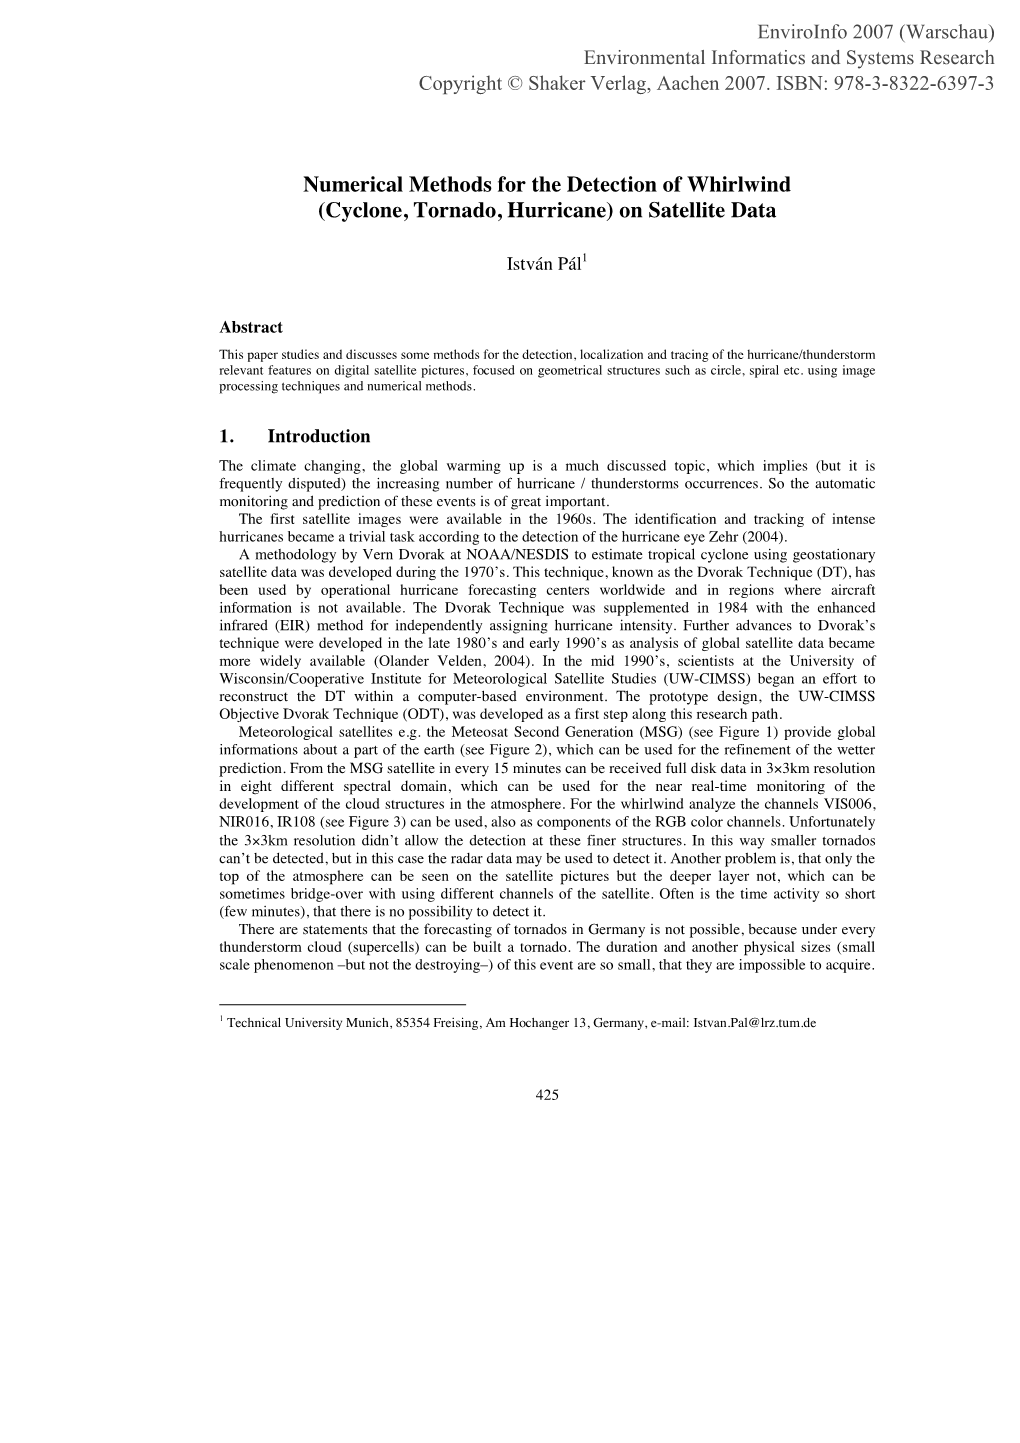 Numerical Methods for the Detection of Whirlwind (Cyclone, Tornado, Hurricane) on Satellite Data